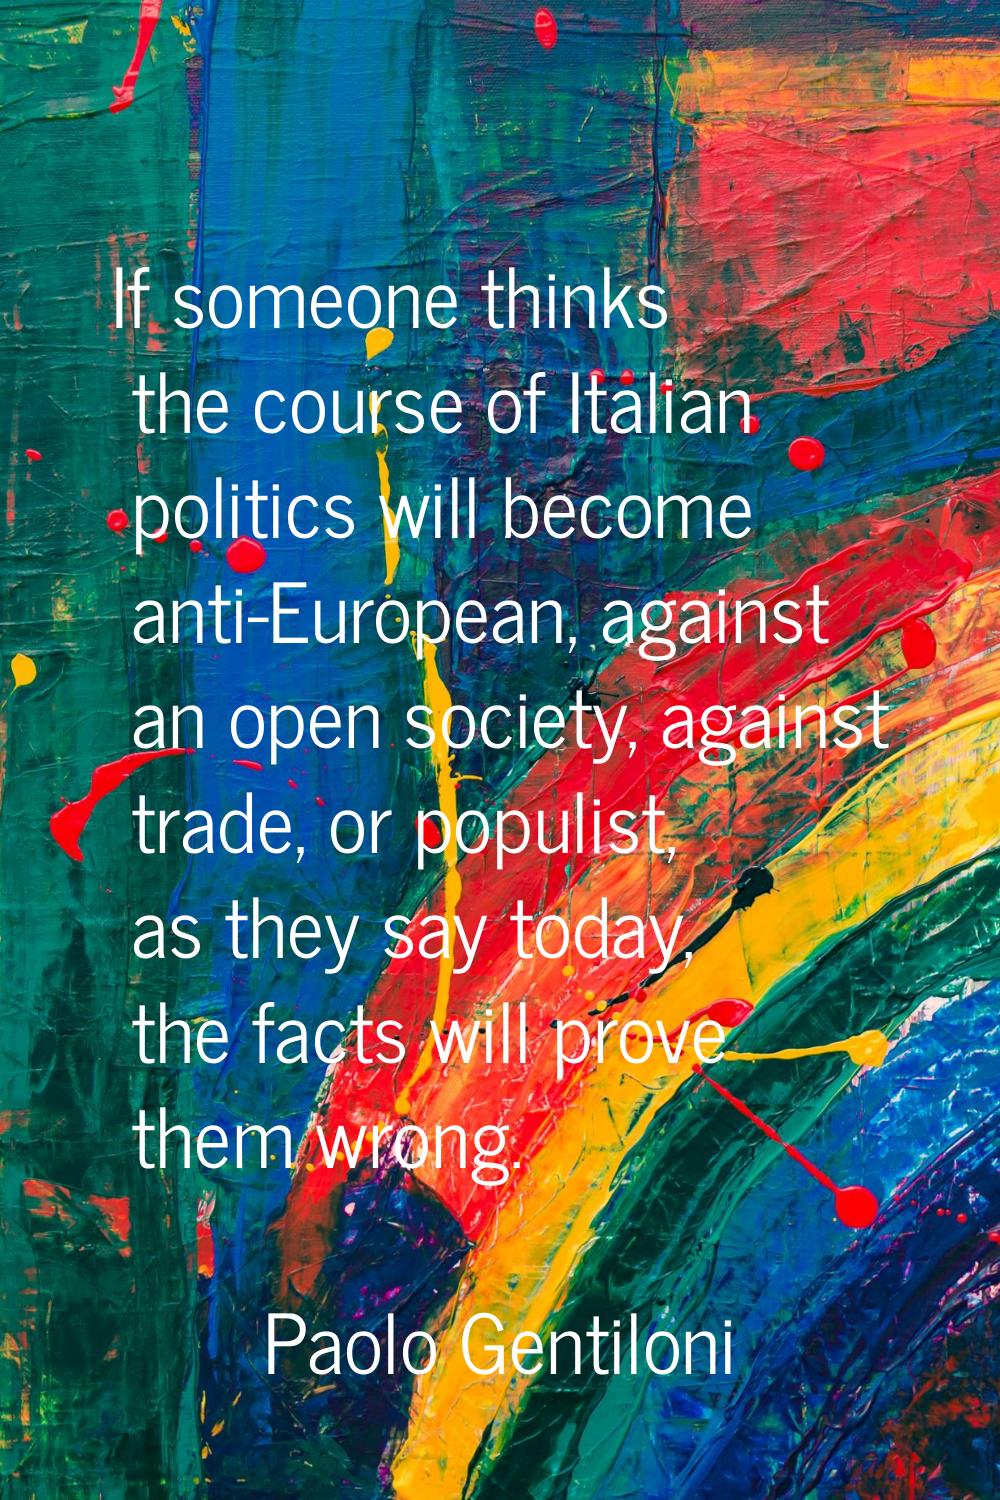 If someone thinks the course of Italian politics will become anti-European, against an open society